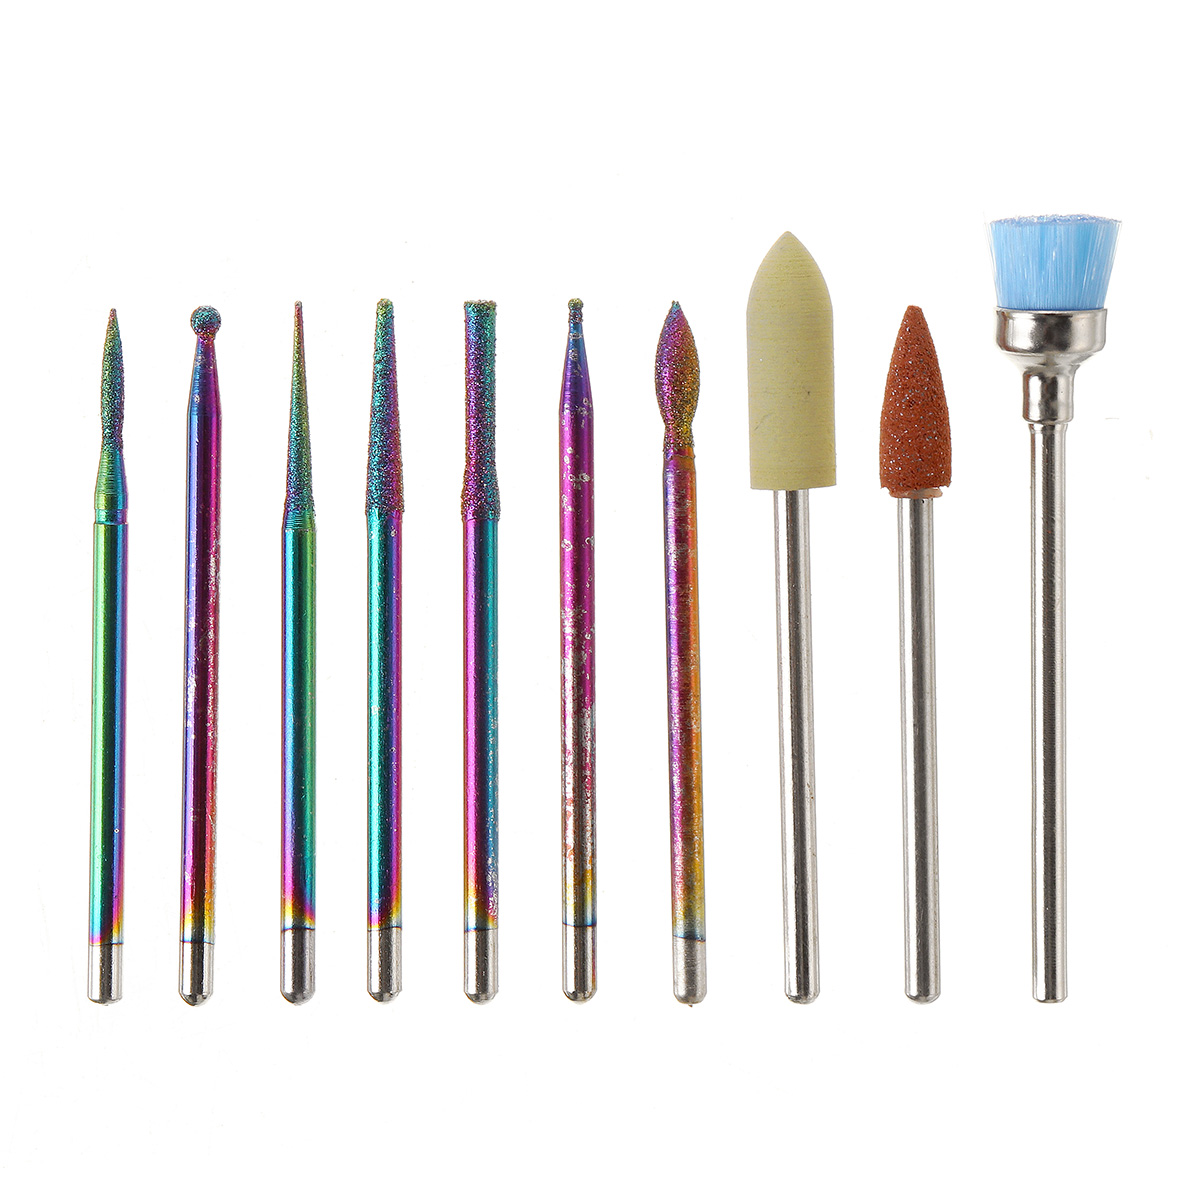 10pcs-Nail-Art-Color-Tungsten-Carbide-Grinding-Drill-Bits-Electric-Nails-Machine-Bit-Grinding-Head-S-1754173-4